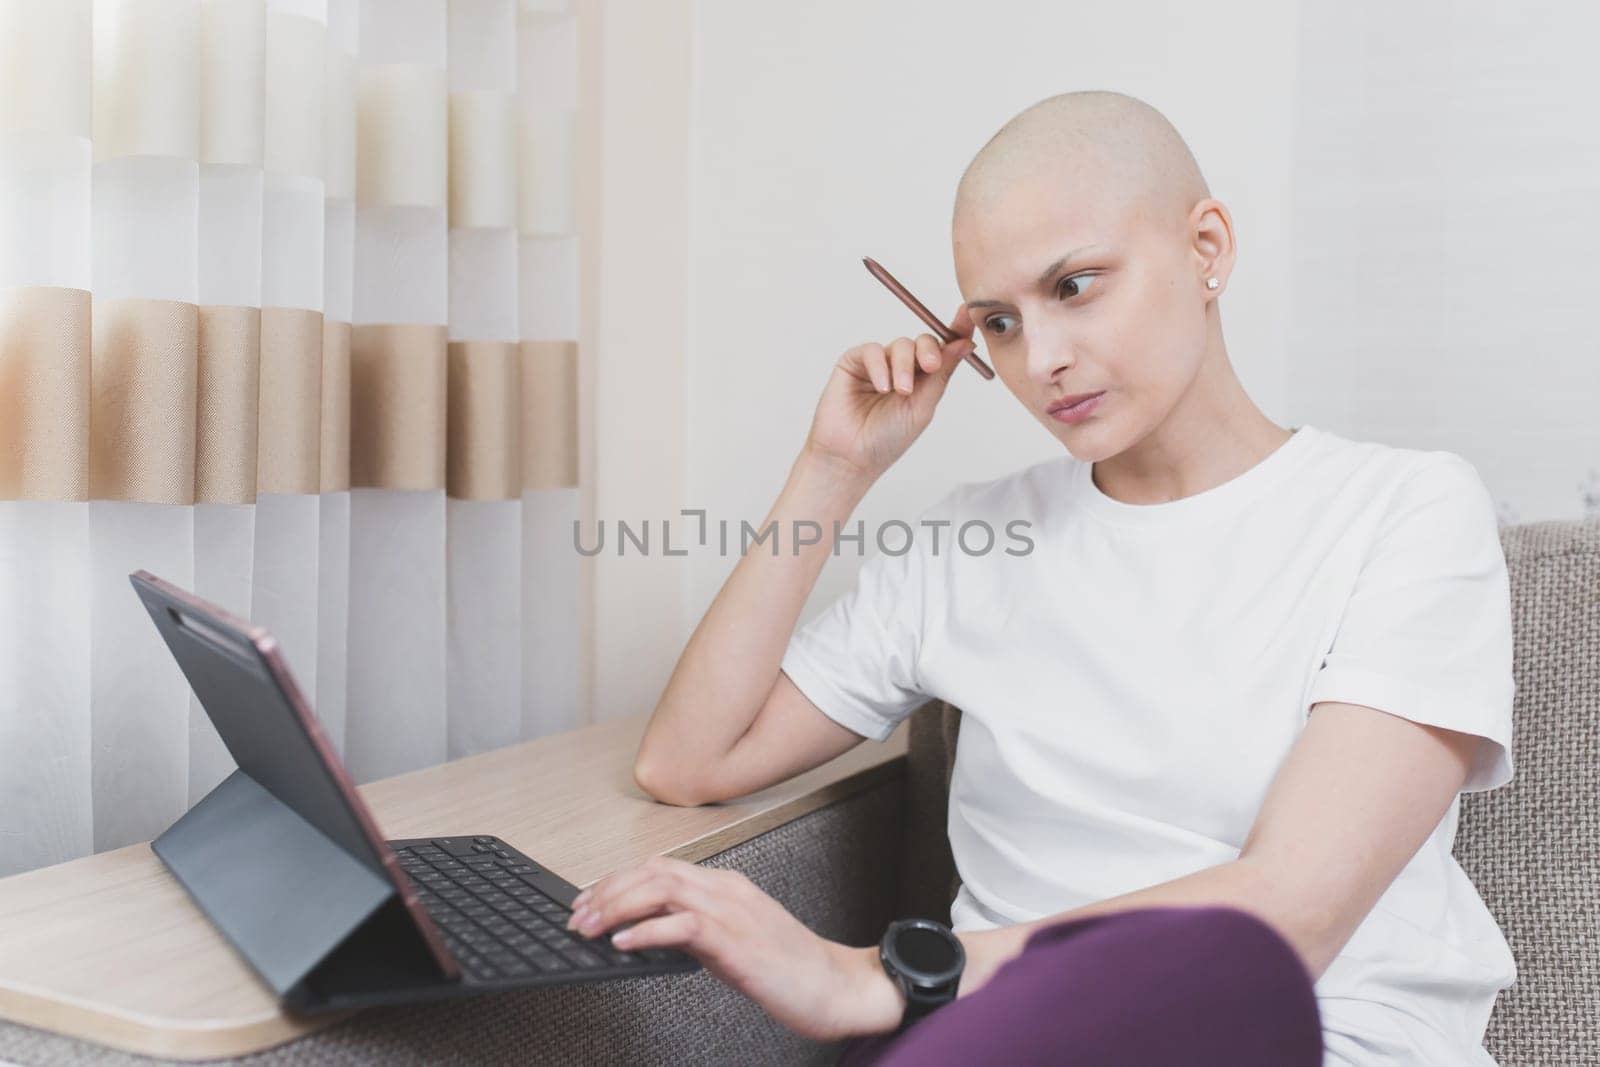 Hairless young woman with cancer wearing a white t-shirt working at laptop in room.